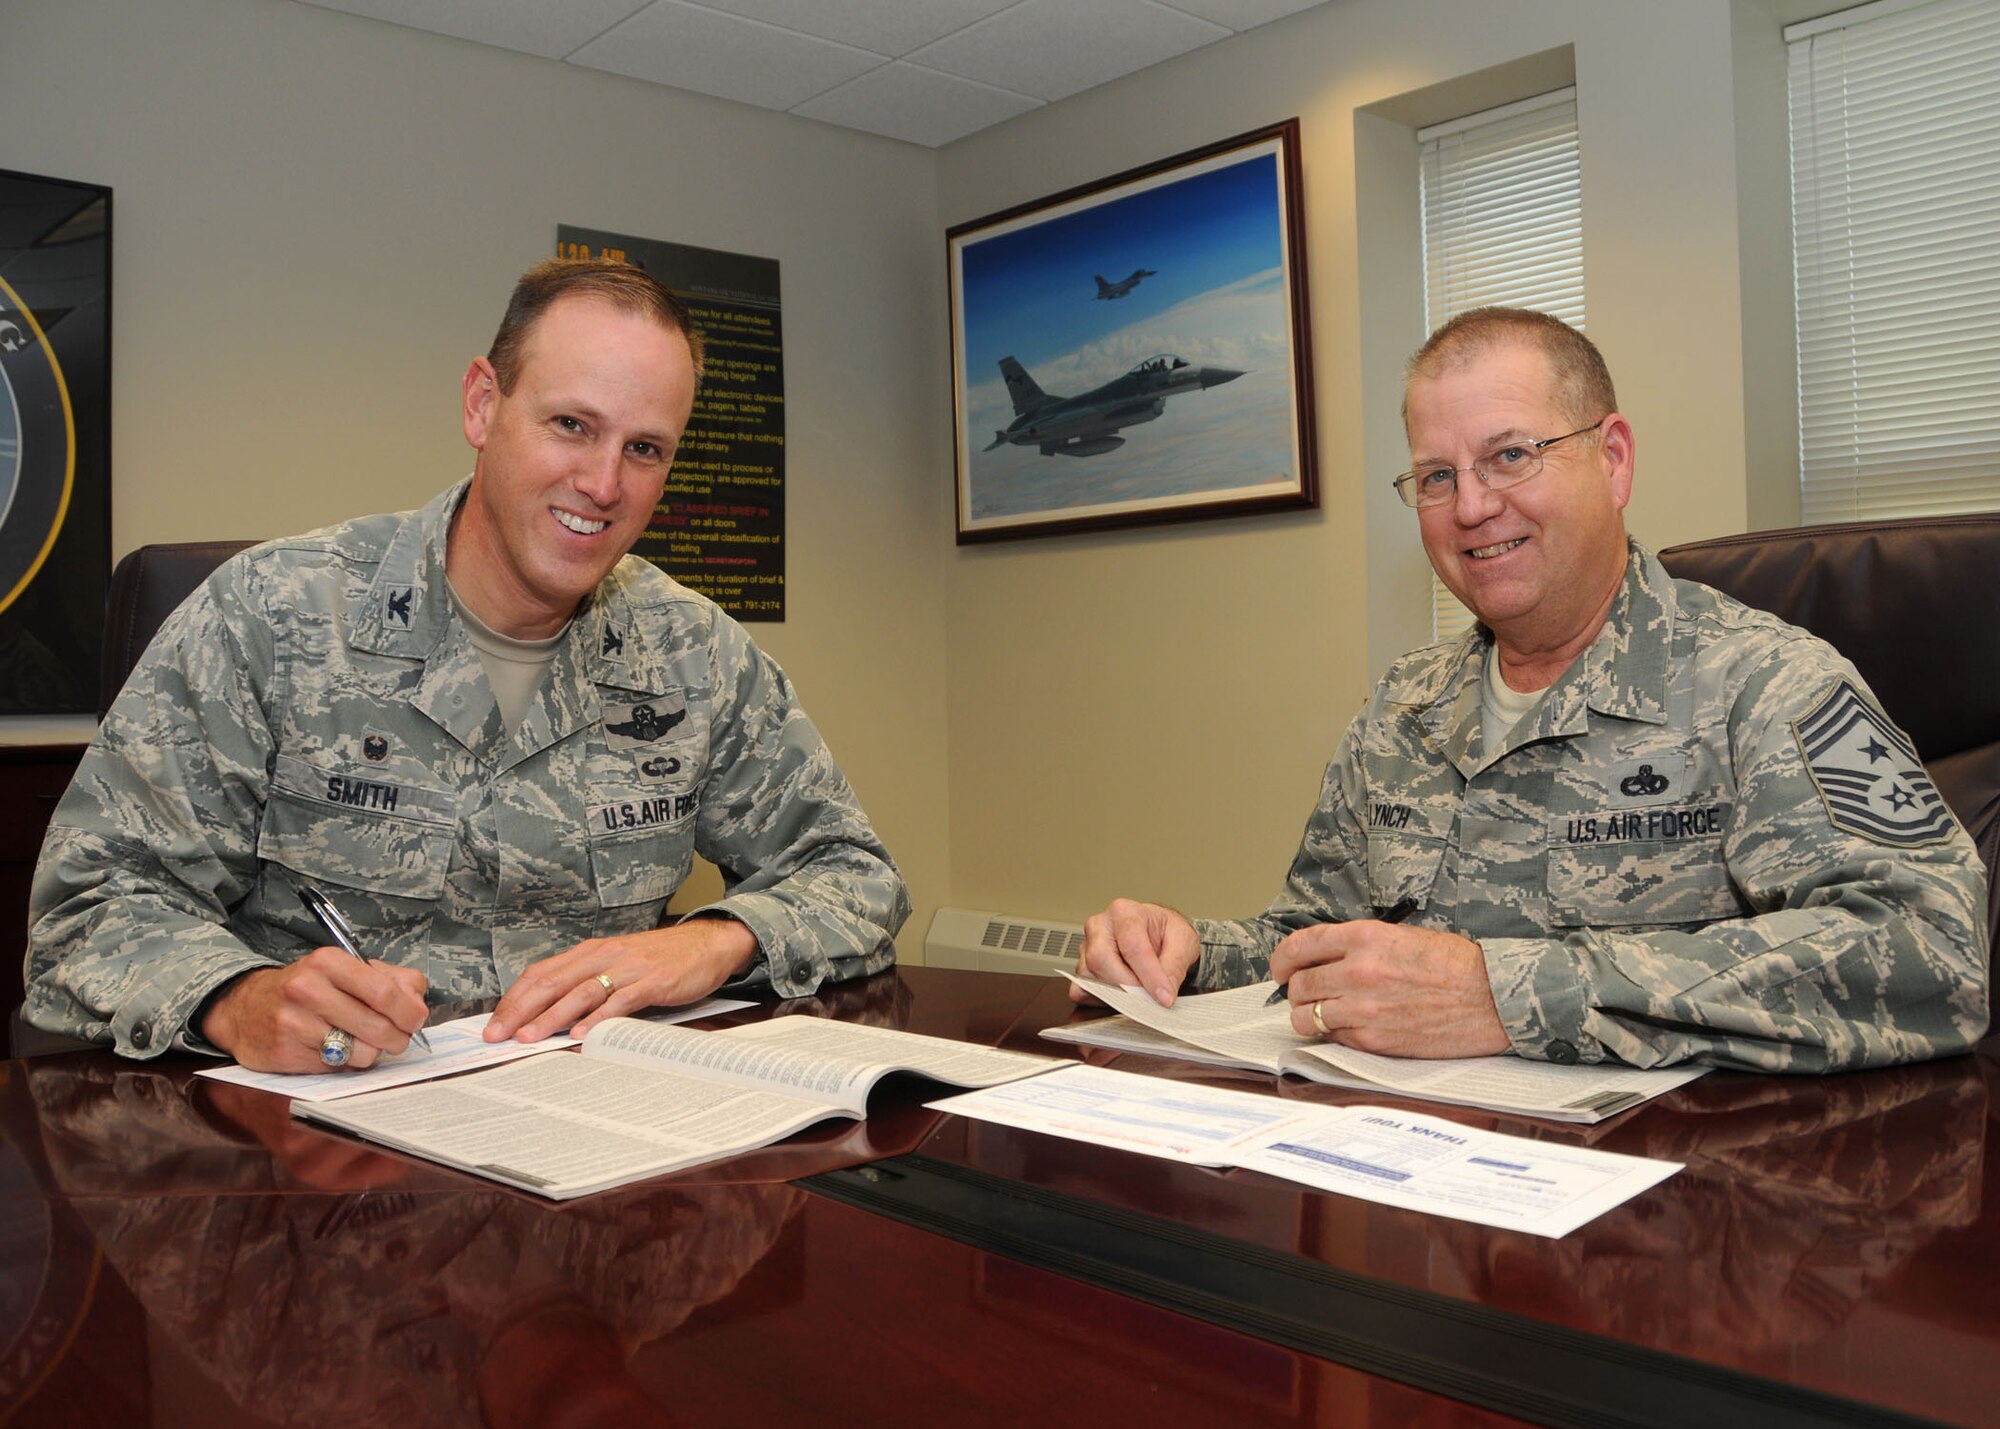 120th Airlift Wing Commander Col. Lee Smith and 120th AW Command Chief Master Sgt.  Steven Lynch review their Combined Federal Campaign booklets Sept. 29, 2016. The federally-approved campaign to raise funds for charities runs from October 1 through December 15, 2016 for the 120th AW in Great Falls, Mont. (U.S. Air National Guard photo by Senior Master Sgt. Eric Peterson)